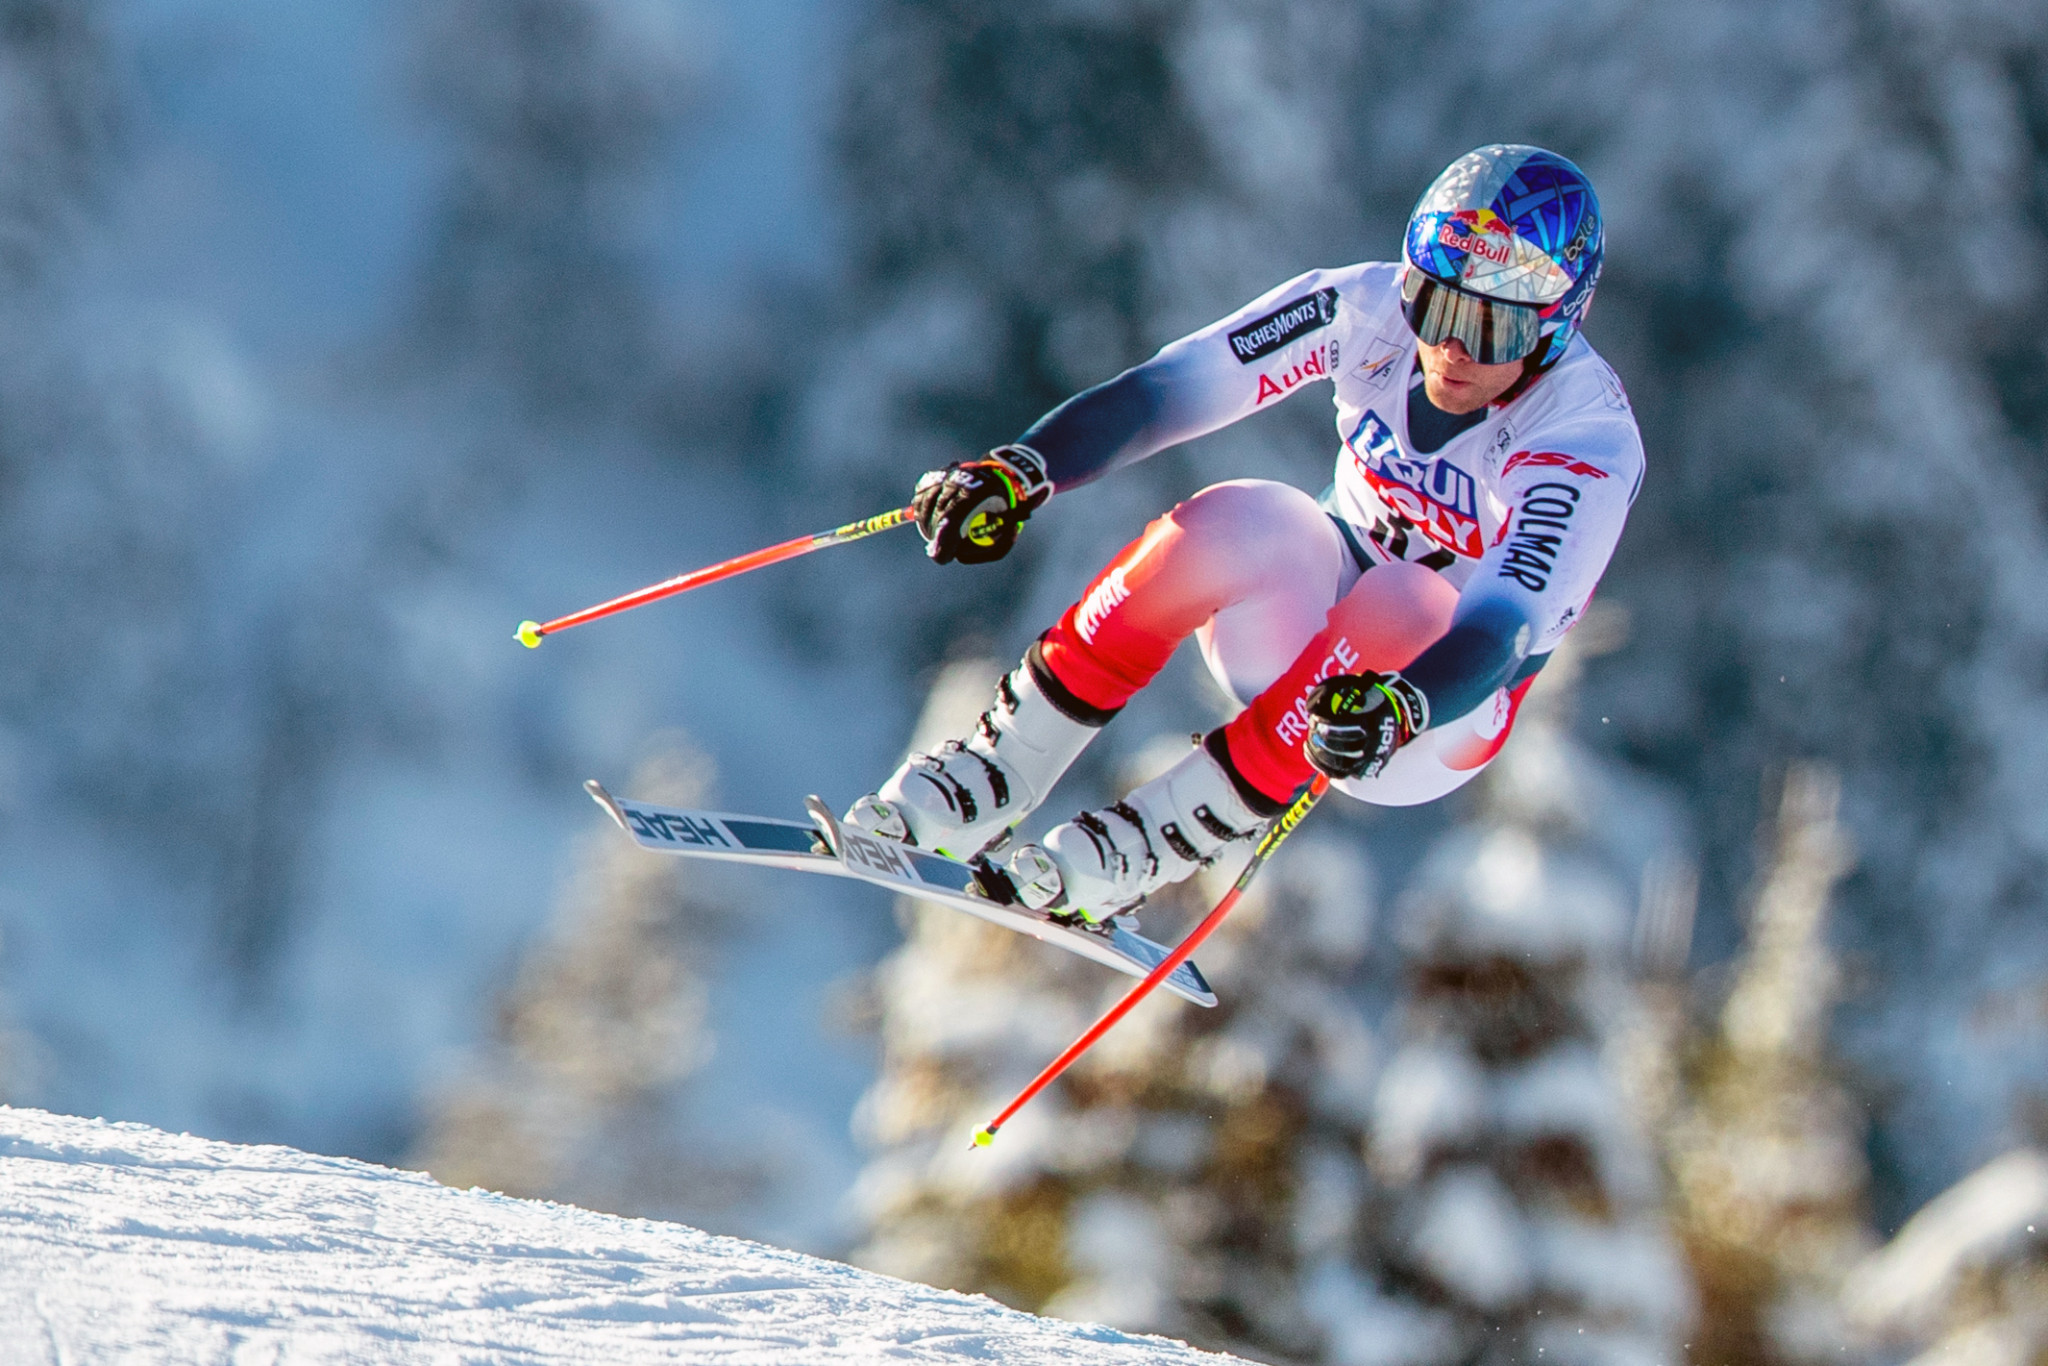 Pinturault aims to extend lead at FIS Alpine Ski World Cup in Kvitfjell